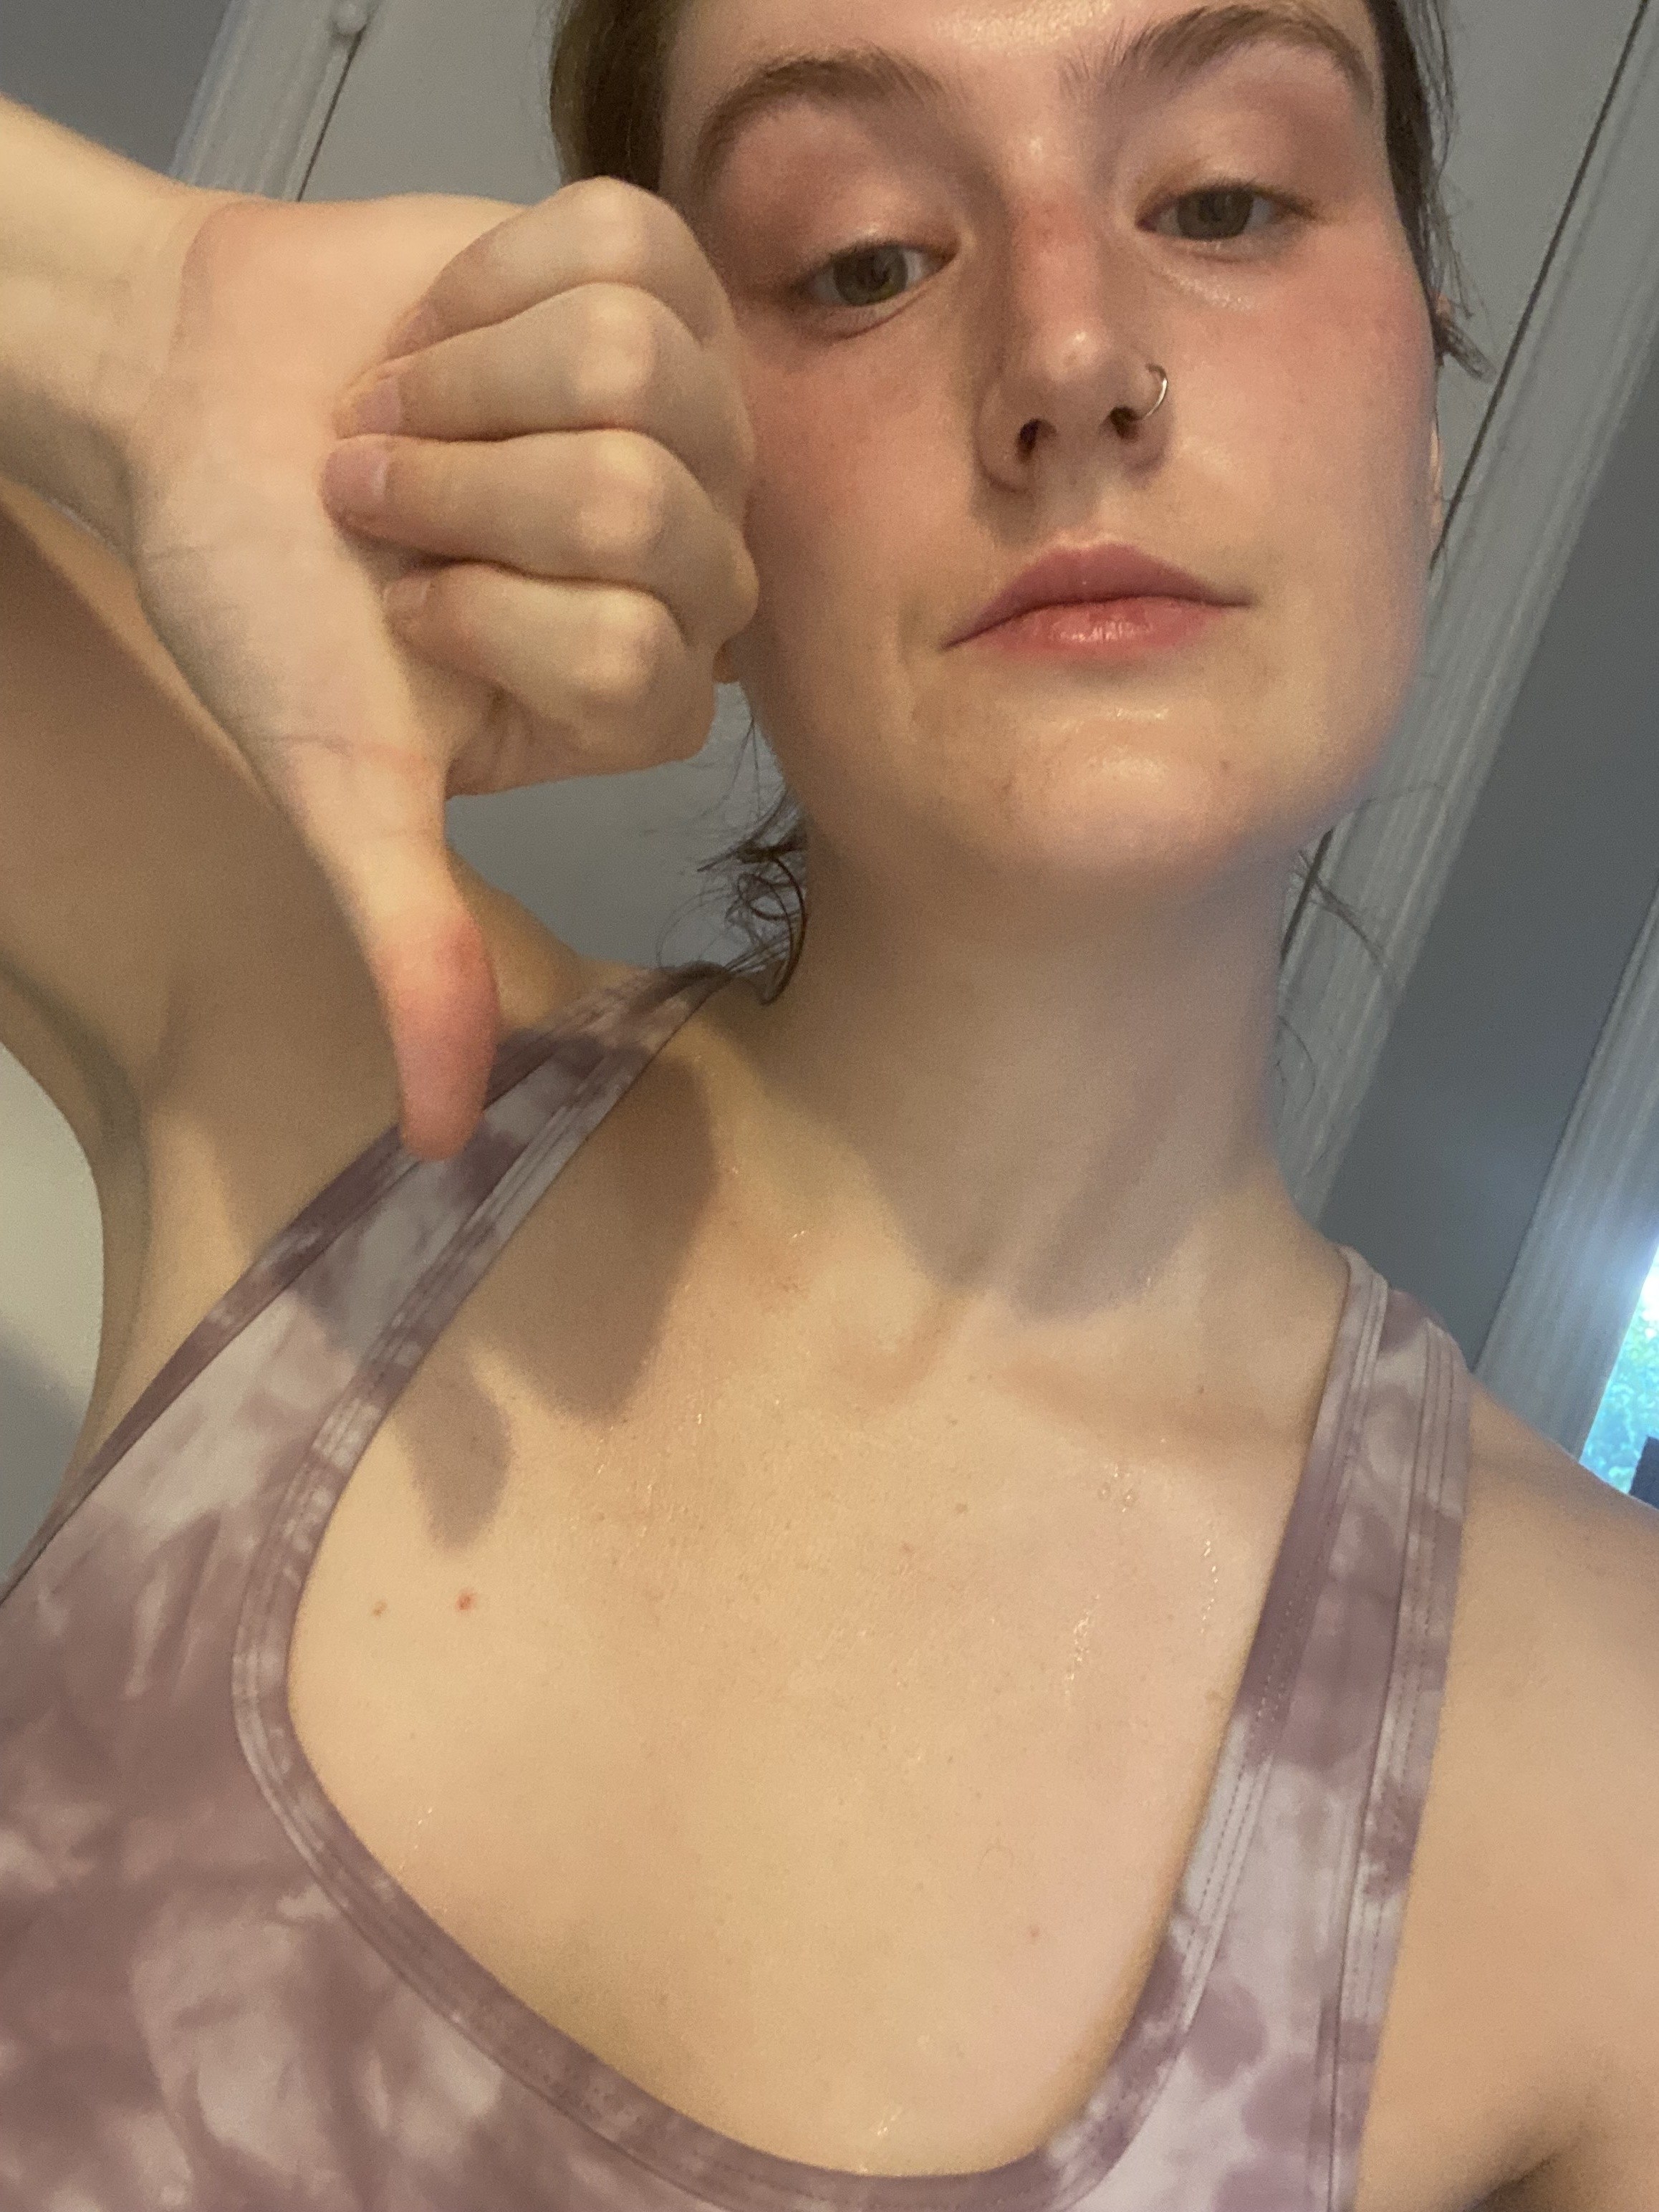 Me, sweaty and tired after my run and giving a thumbs down